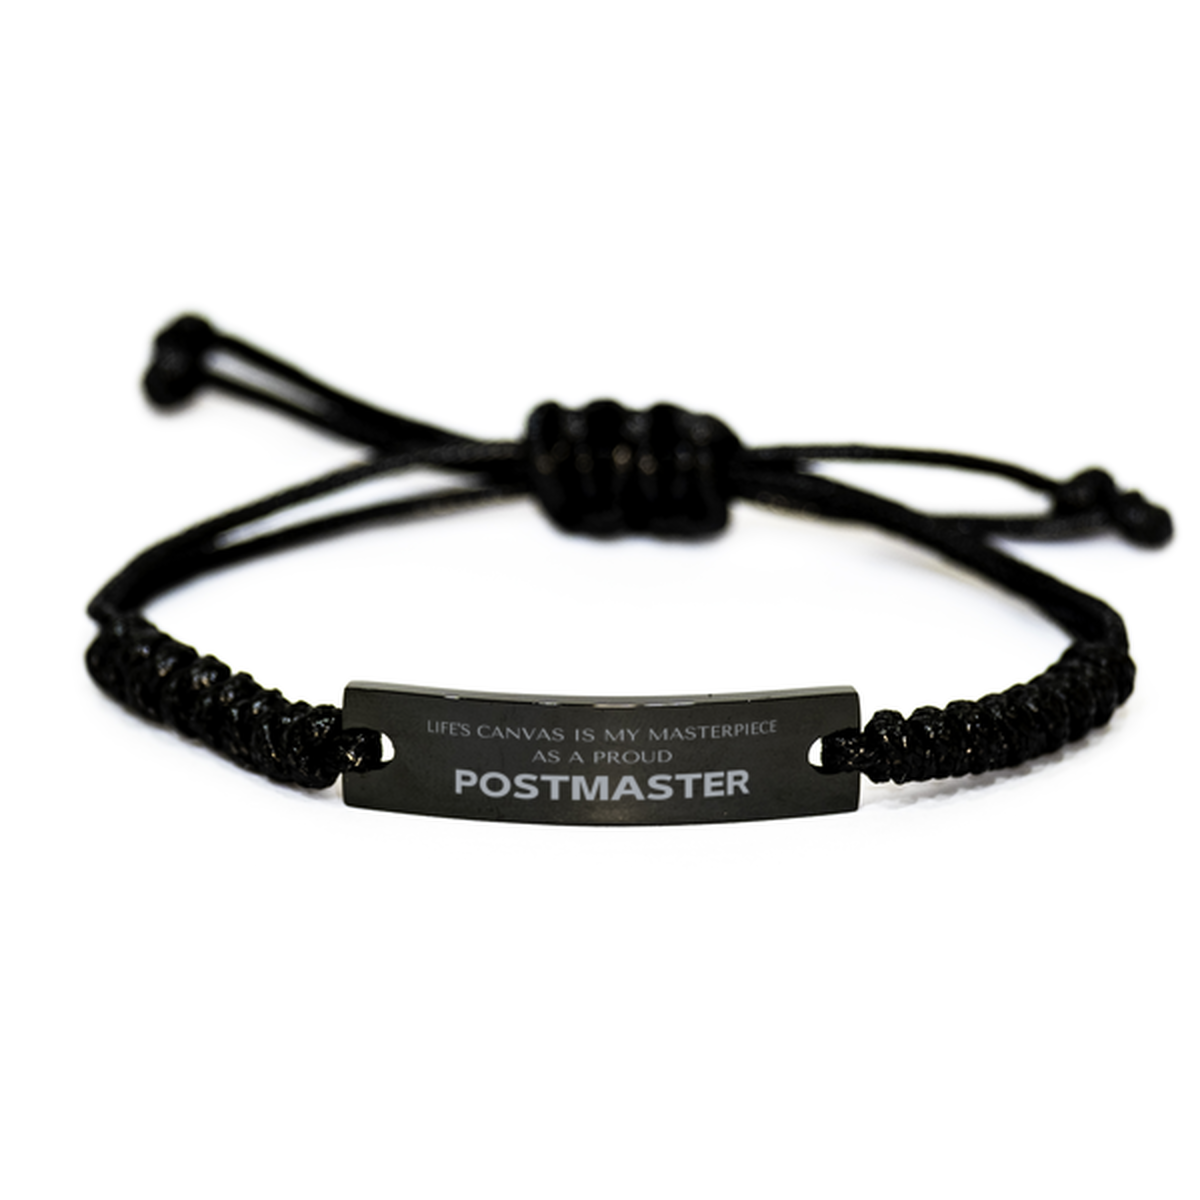 Proud Postmaster Gifts, Life's canvas is my masterpiece, Epic Birthday Christmas Unique Black Rope Bracelet For Postmaster, Coworkers, Men, Women, Friends